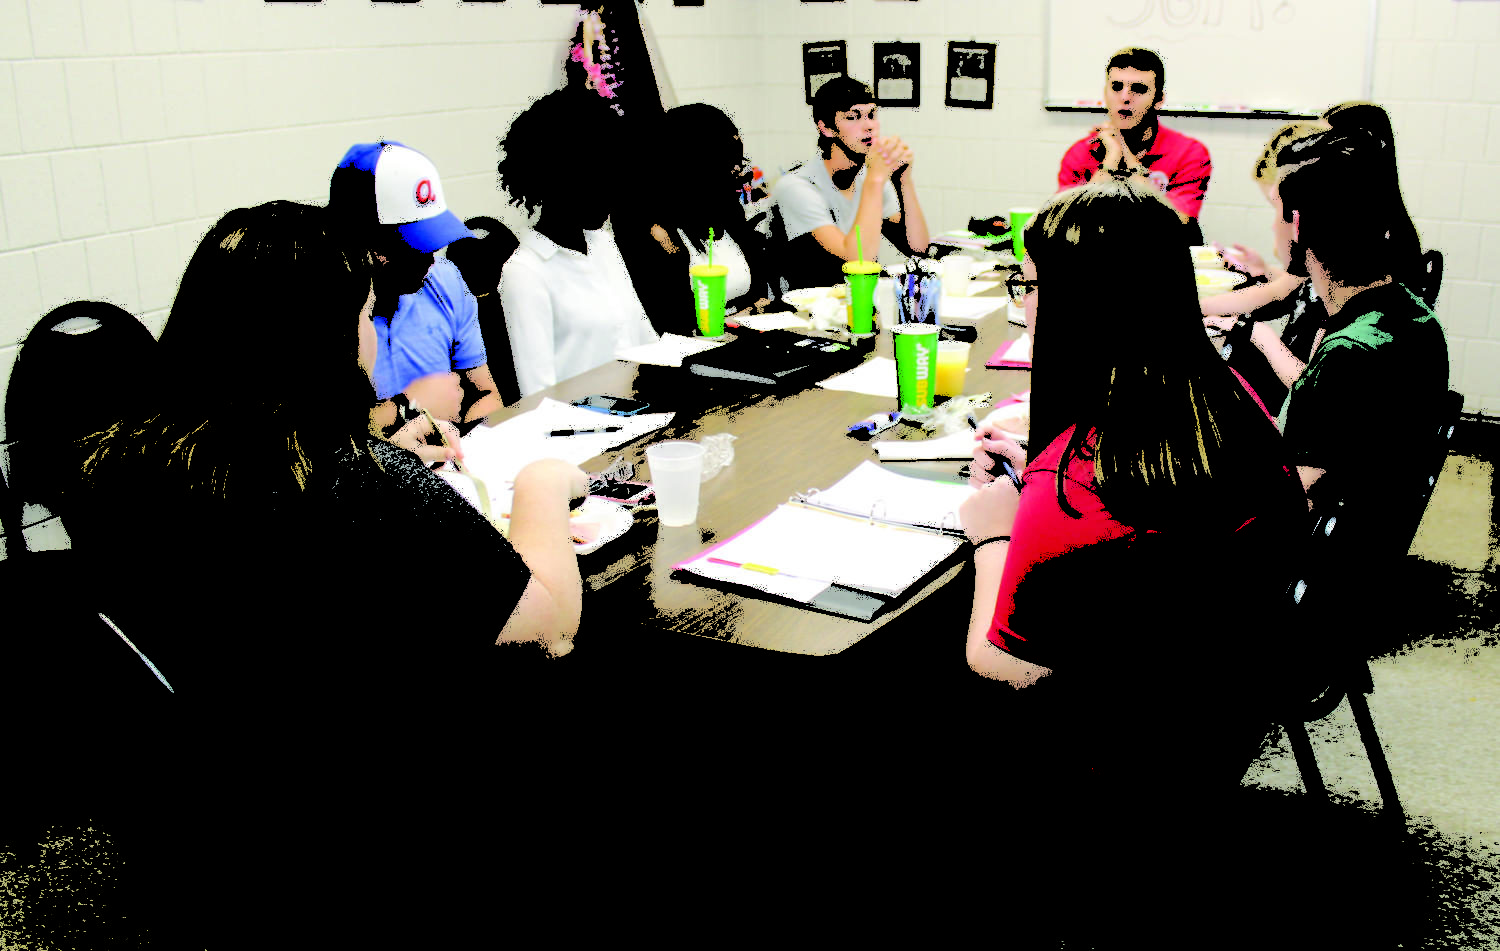 The Student Government Association gathers for a meeting on Wednesday, Aug. 30. SGA is responsible for representing Lake Land’s student body. Applications for freshmen will be available until Sept. 6, and elections will begin Sept. 13.